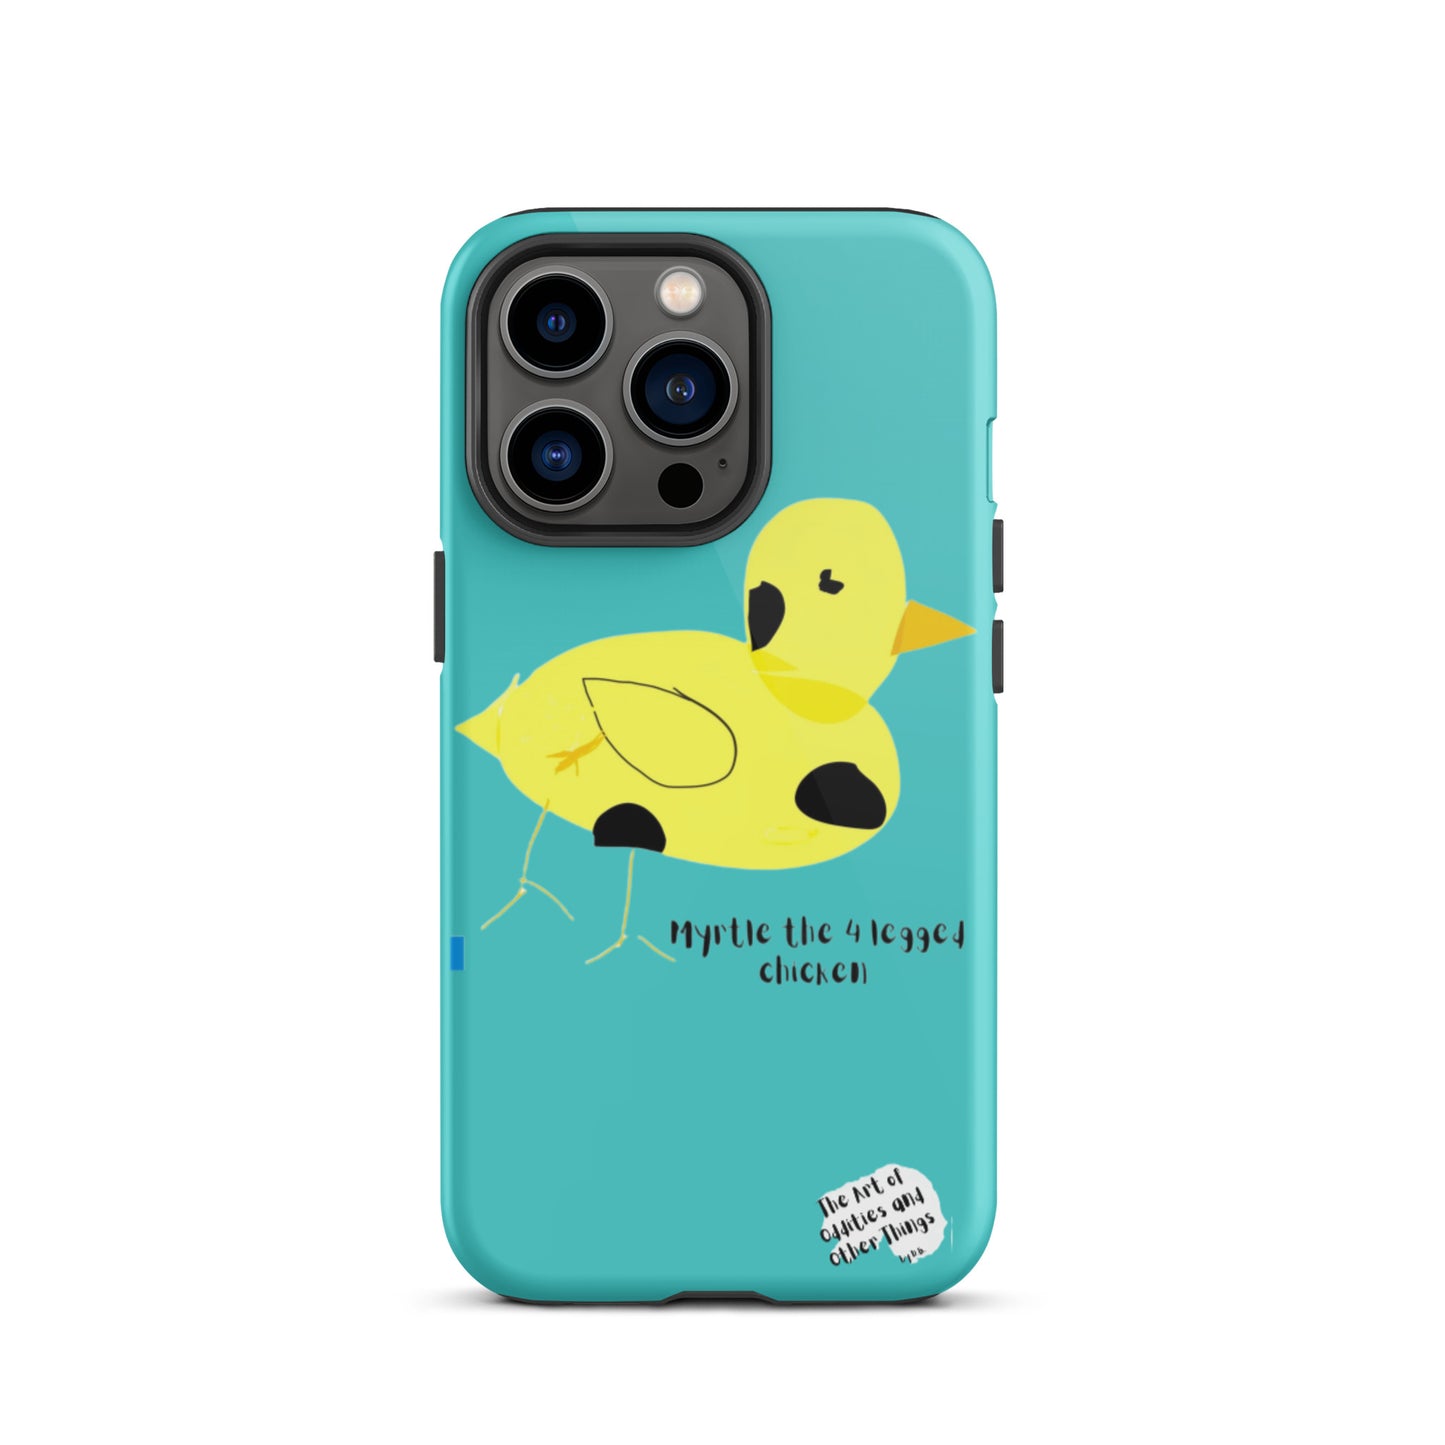 Tough iPhone case Myrtle the Four-Legged Chicken Design by D.B.